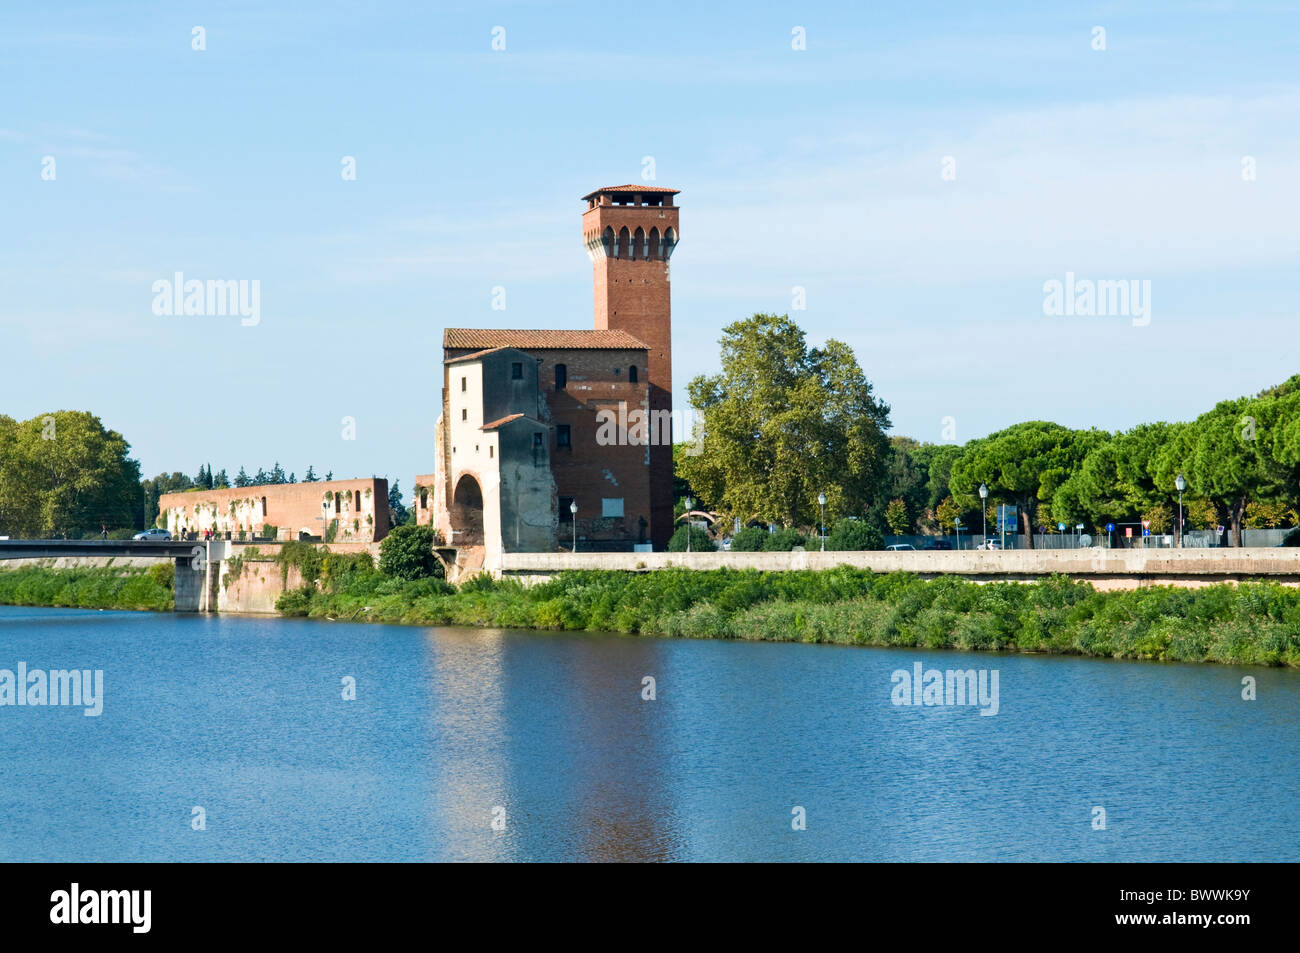 The Tower of the Citadel and Arno River, Pisa, Tuscany, Italy, Europe Stock Photo